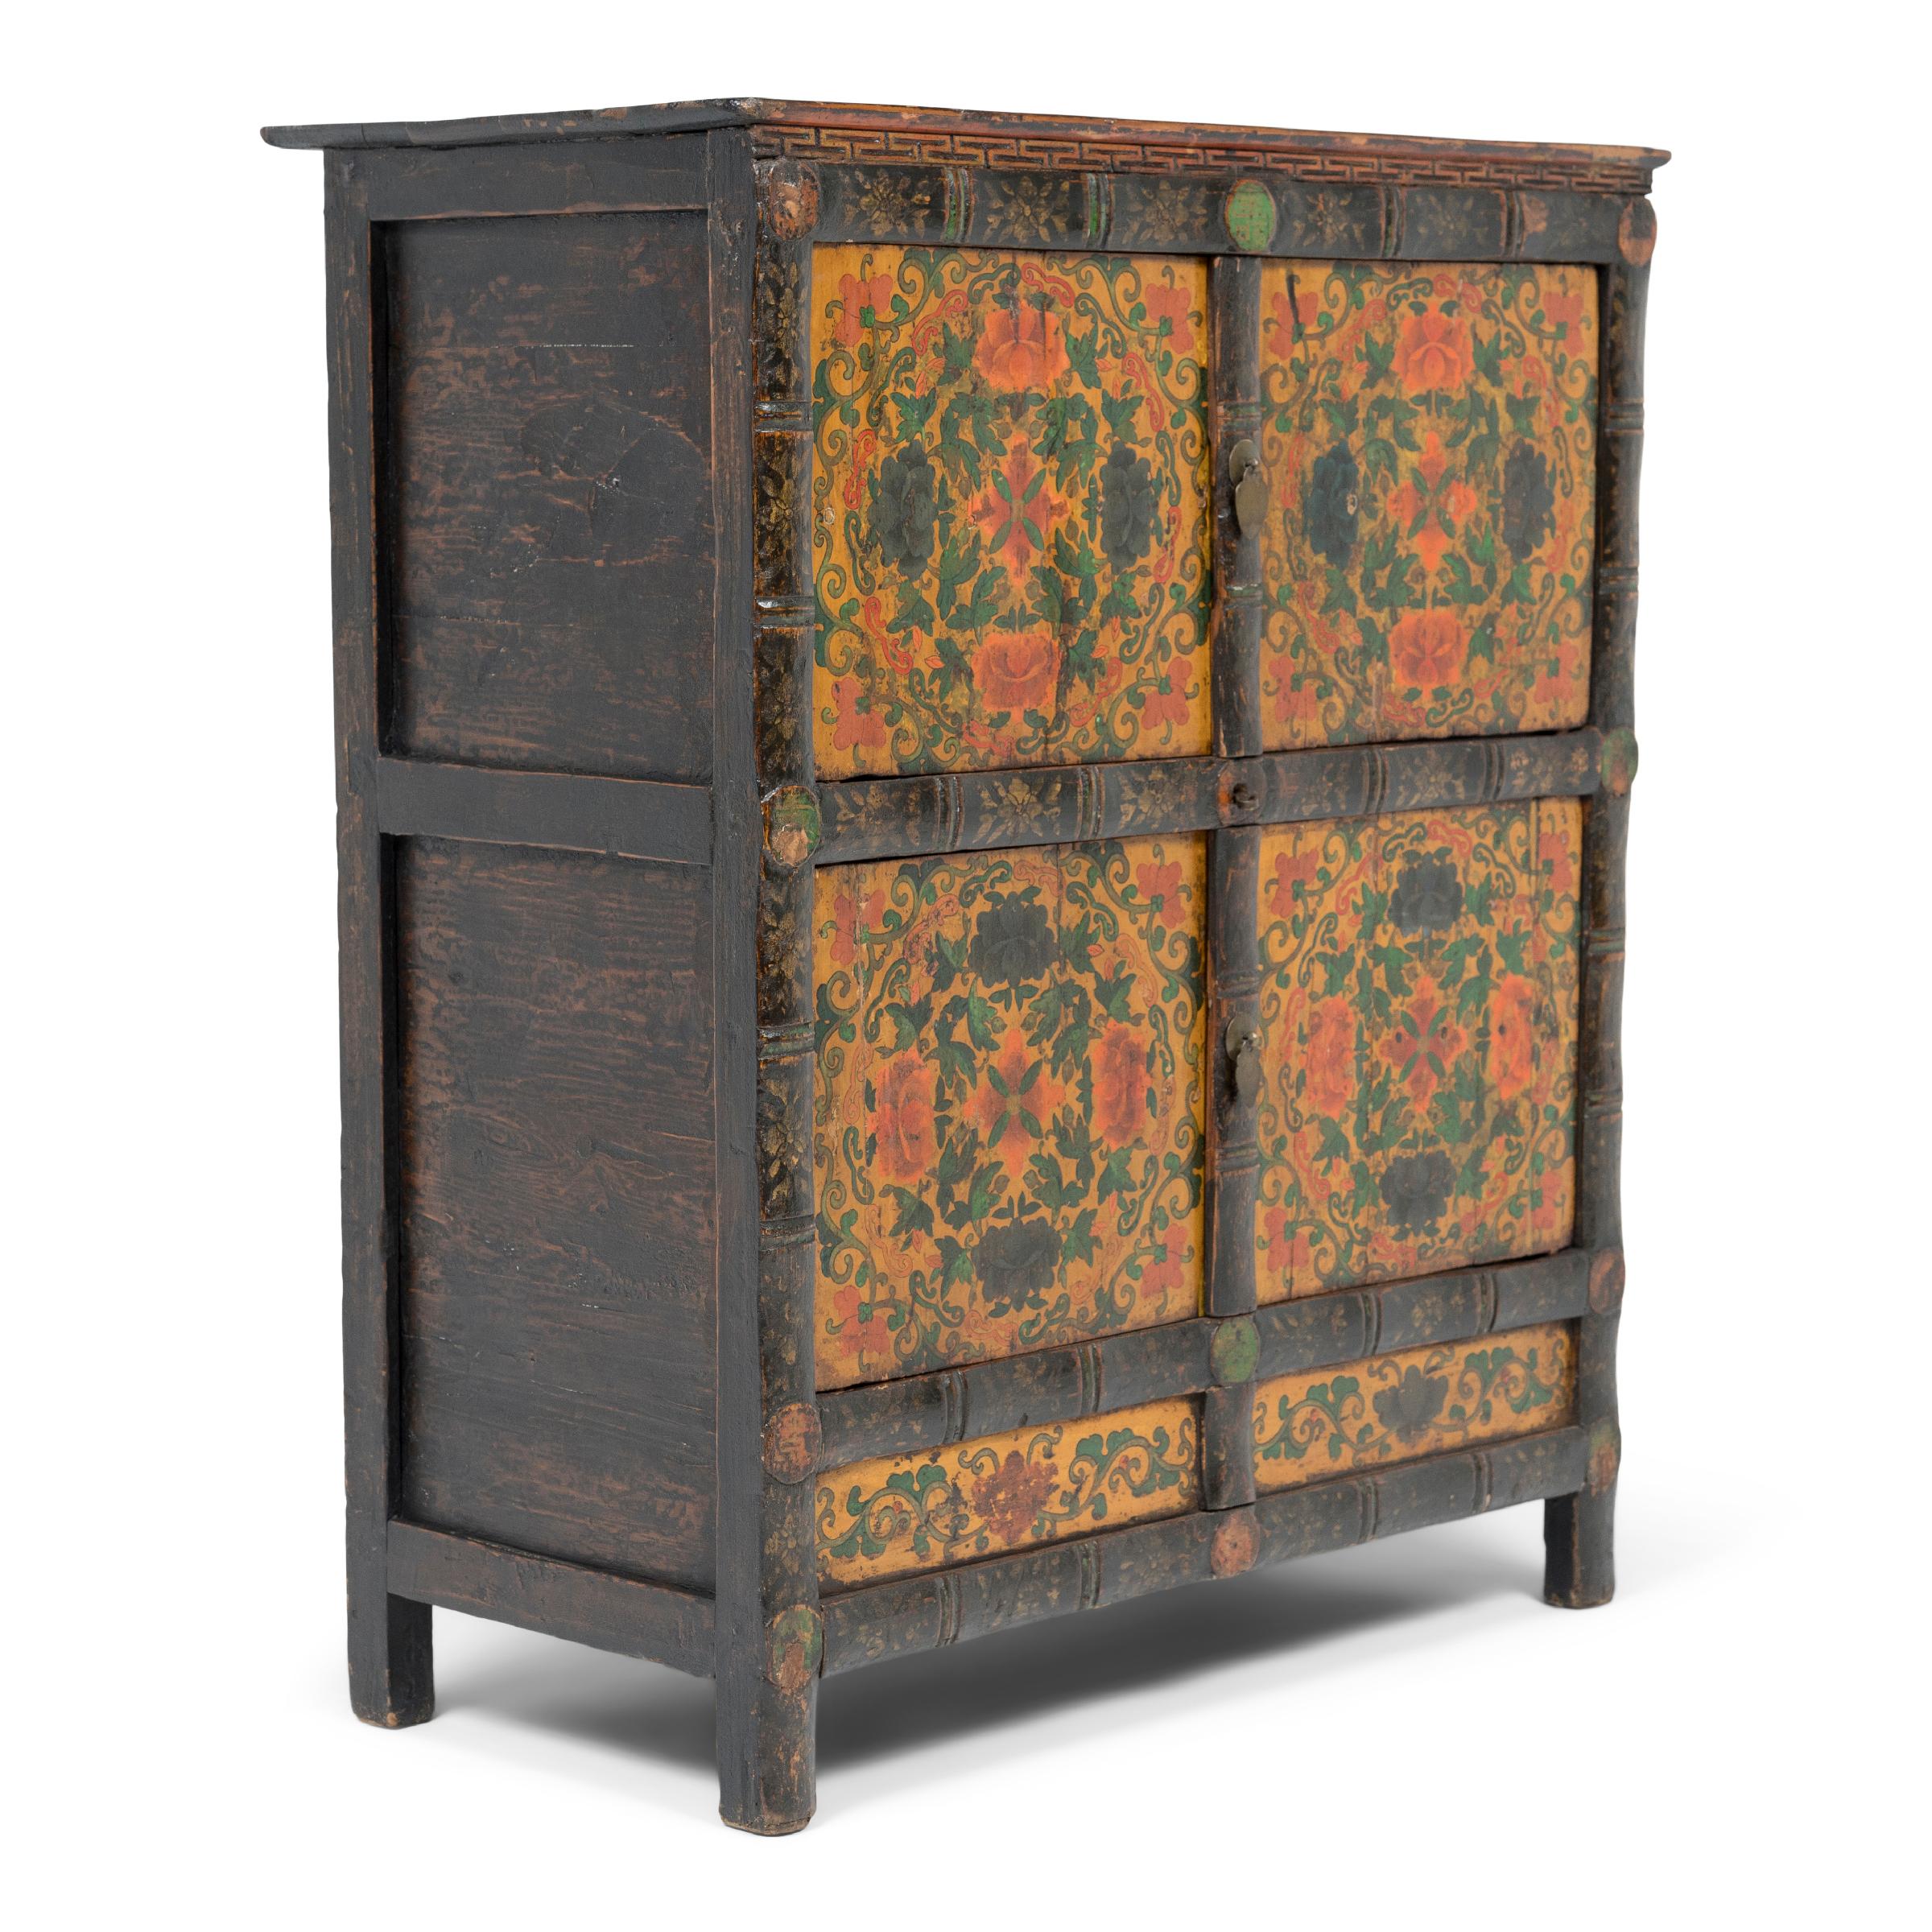 This 19th-century storage cabinet is intricately hand-painted in the Sino-Tibetan style with brightly pigmented gouache paints in a palette of yellow, orange, green, and black. The cabinet front is divided into six inset panels, each painted with